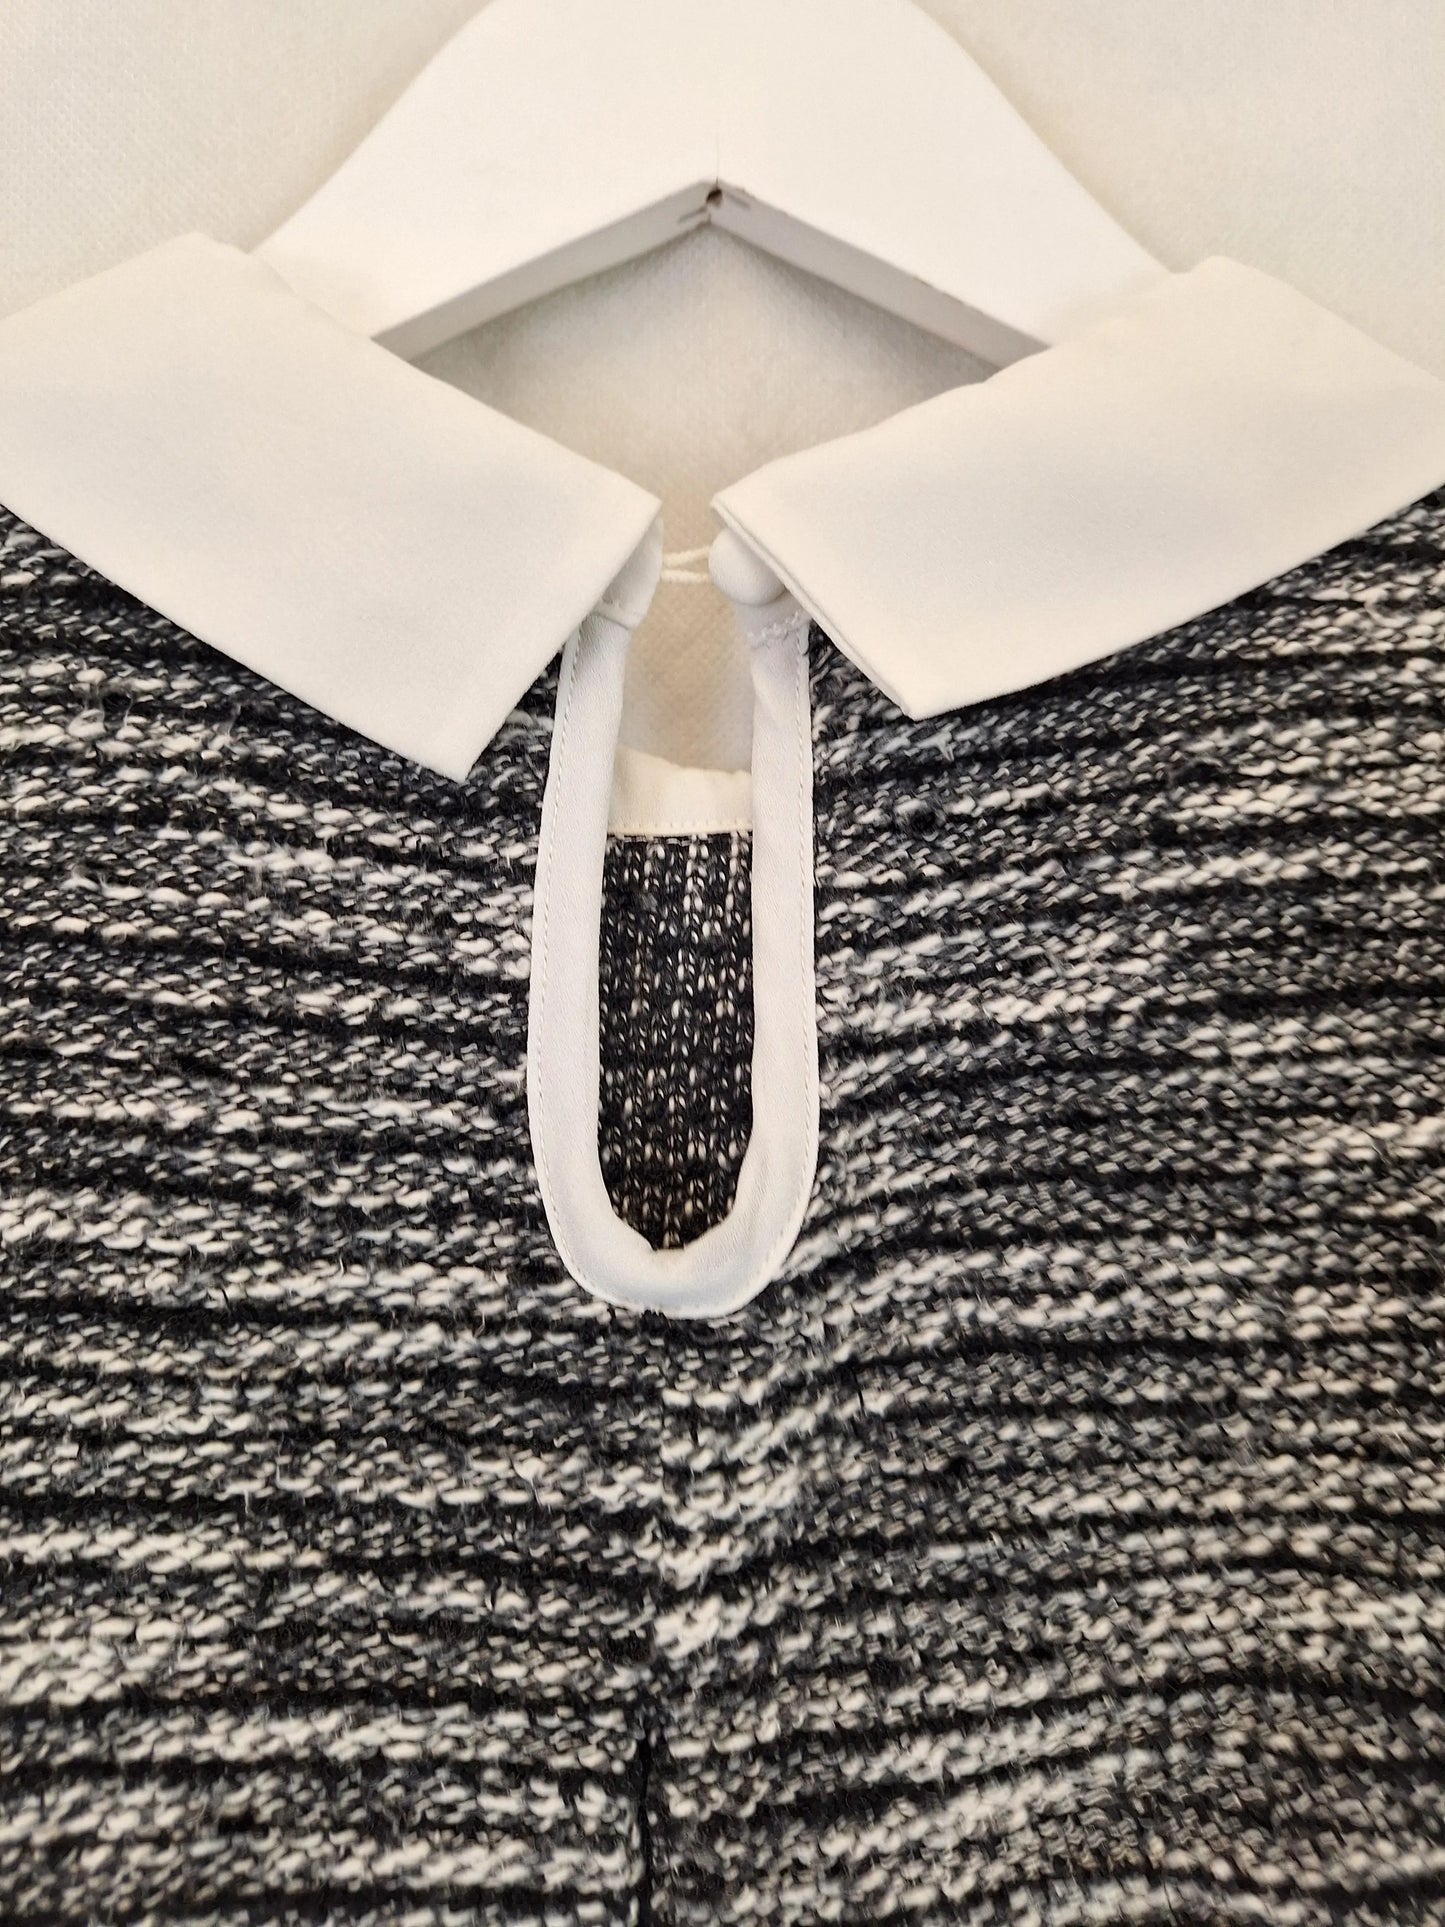 Review Preppy Layered Peter Pan Collar Top Size 8 by SwapUp-Online Second Hand Store-Online Thrift Store